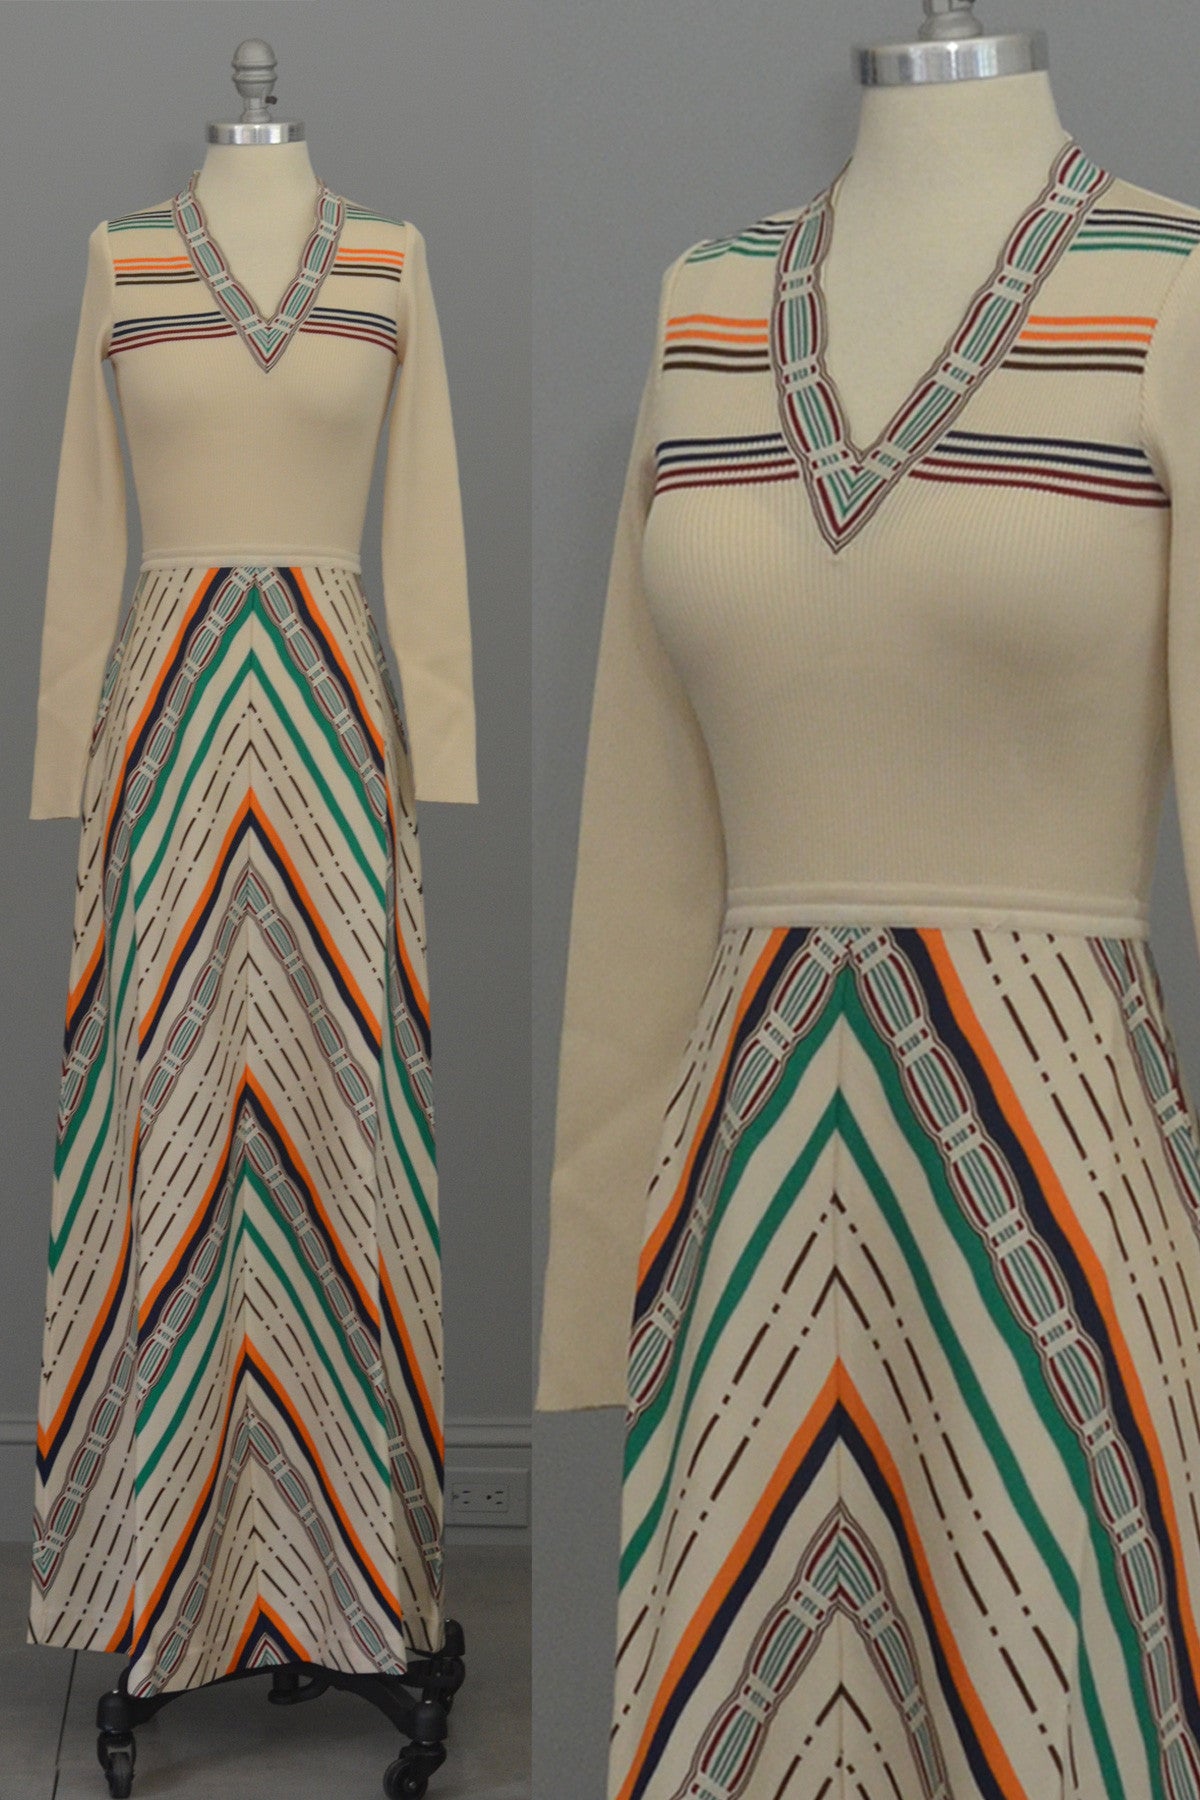 MOD Vintage 1970s Cream Chevron Stripes A-Line Maxi Knit Dress by Crissa Made in Italy